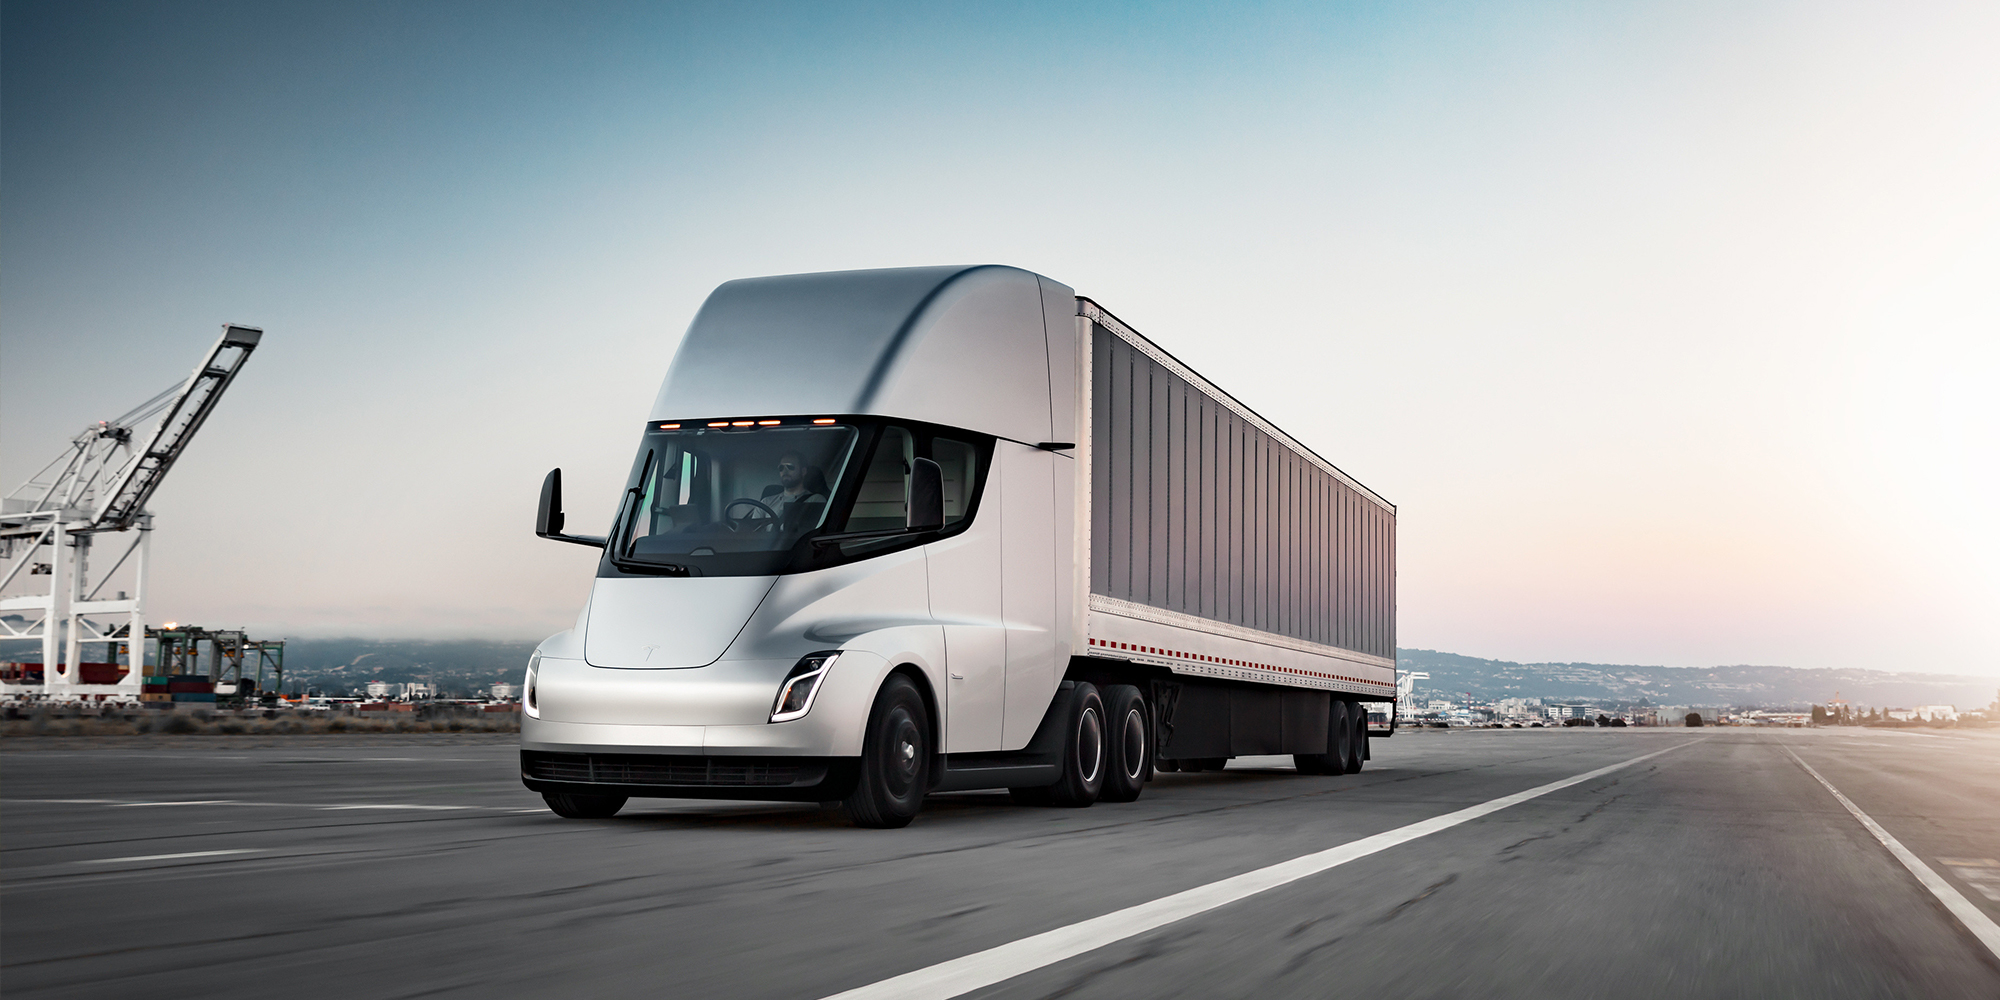 Mirakuløs Indflydelse sten Tesla says Tesla Semi electric truck's weight is on point, and that's  crucial | Electrek